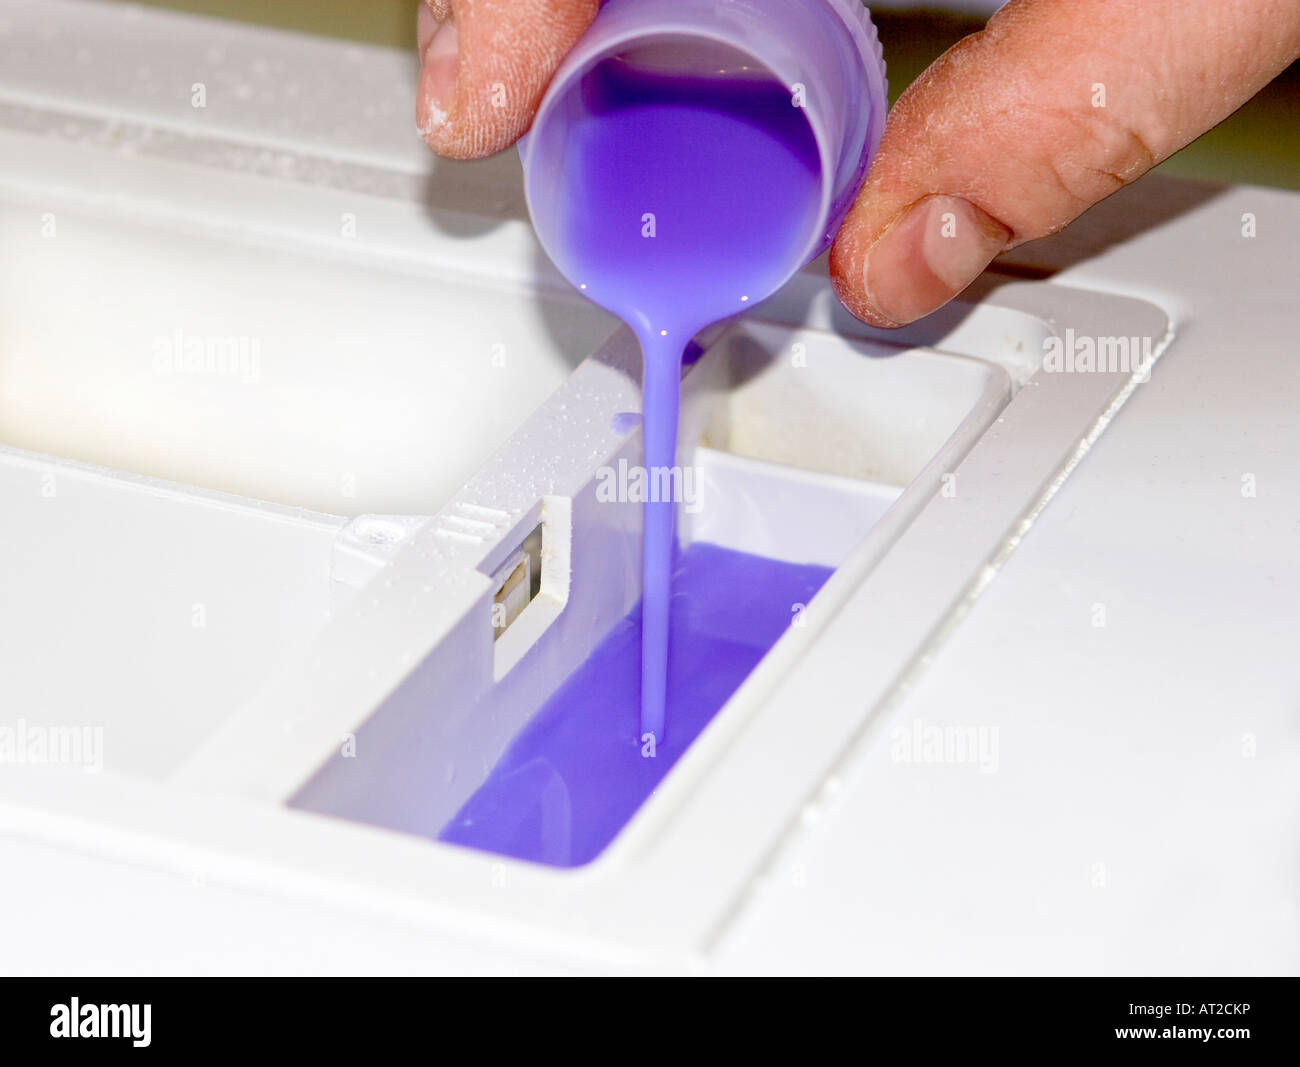 Man Pouring Fabric Softener into a Washing Machine Stock Photo